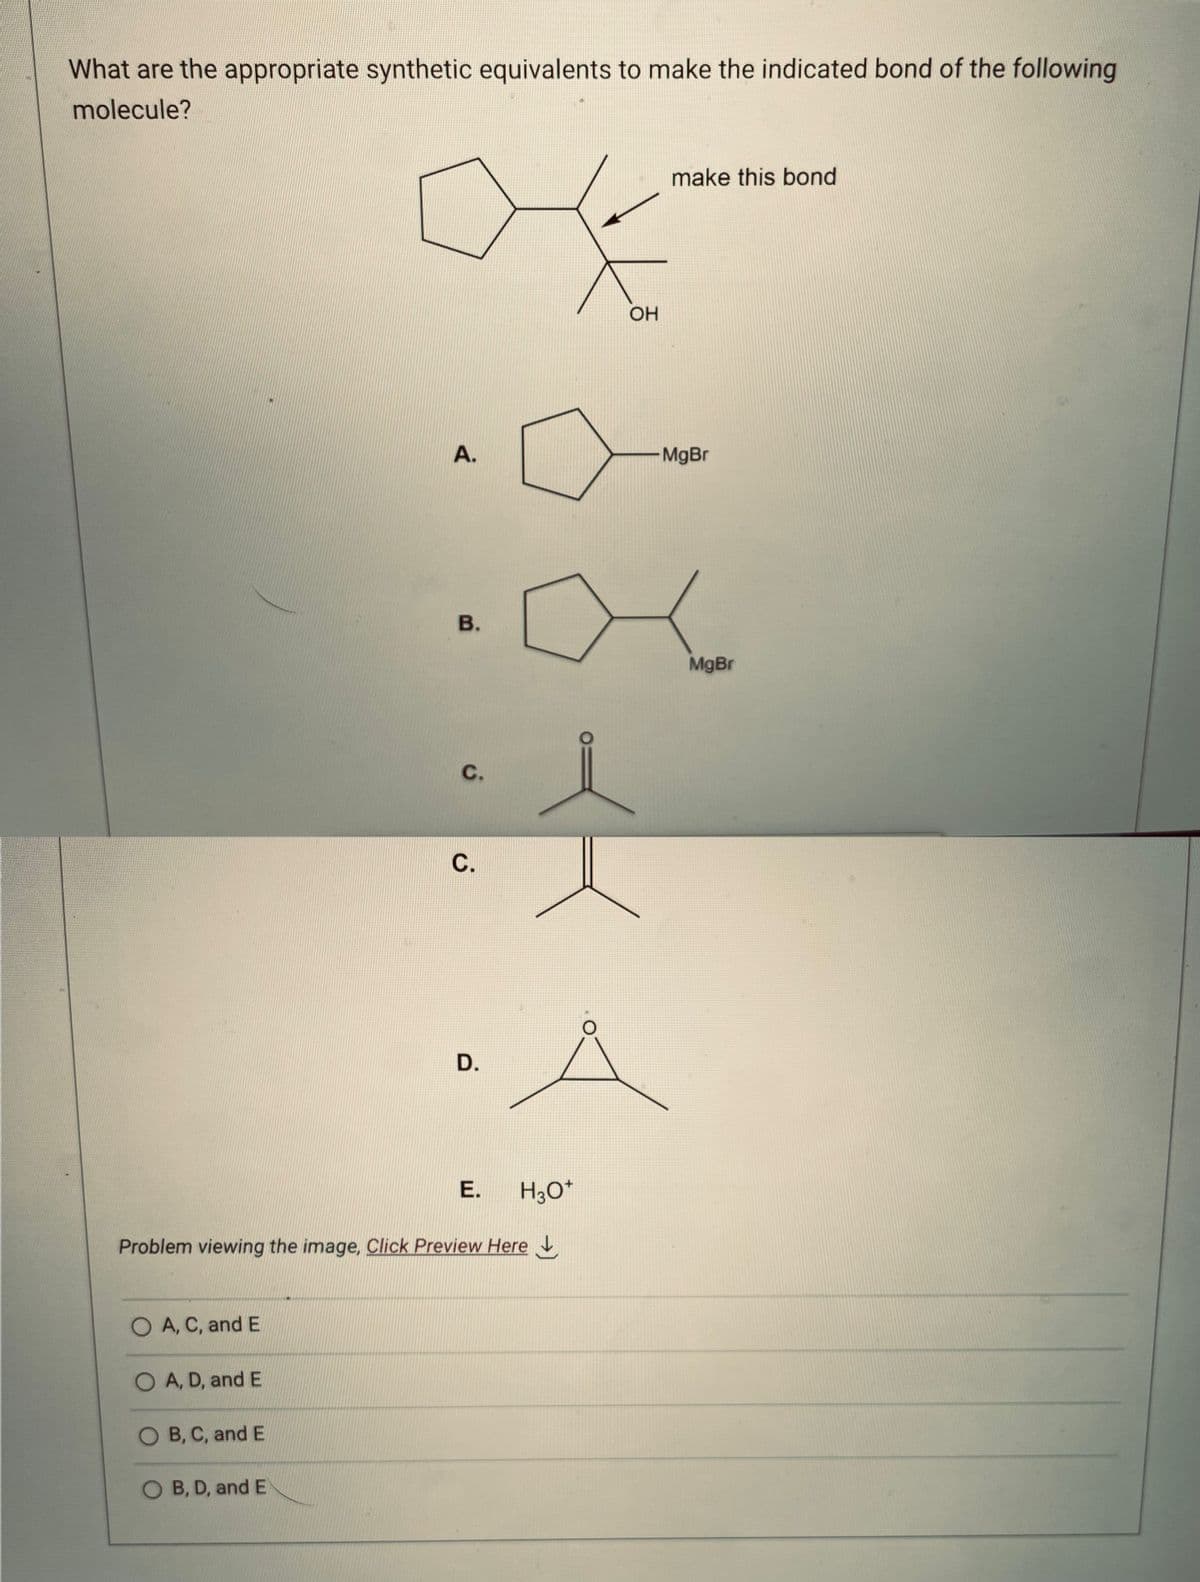 What are the appropriate synthetic equivalents to make the indicated bond of the following
molecule?
O A, C, and E
O A, D, and E
OB, C, and E
A.
O B, D, and E
B.
Problem viewing the image. Click Preview Here
C.
4
C.
D.
E.
H3O+
OH
make this bond
MgBr
MgBr